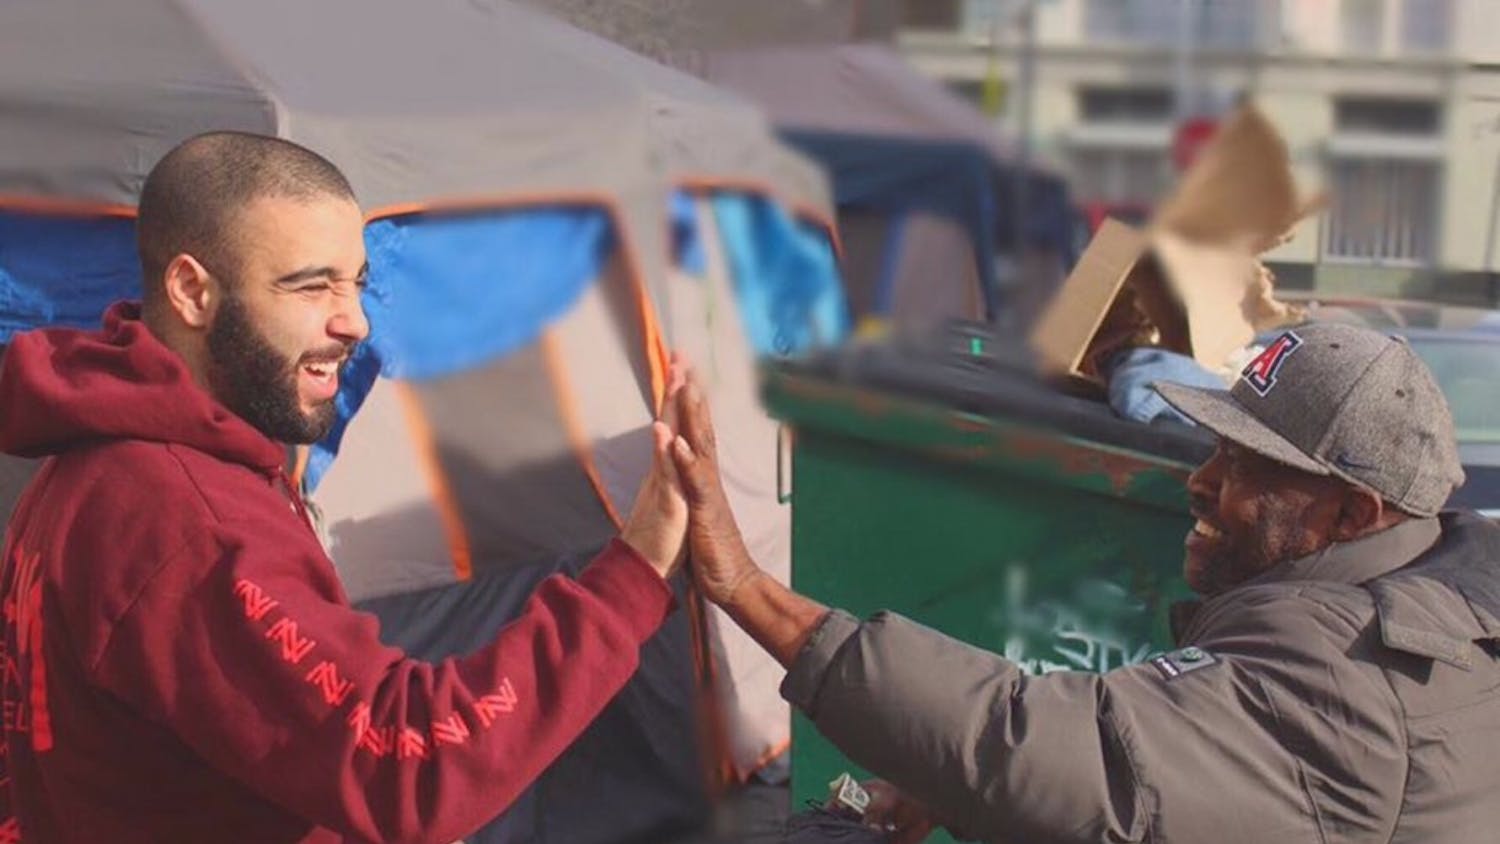 Josh Yazdian (left) high fives a homeless man in Los Angeles. Yazdian has donated thousands of clothing items to the homeless through his company, Yaz Apparel.